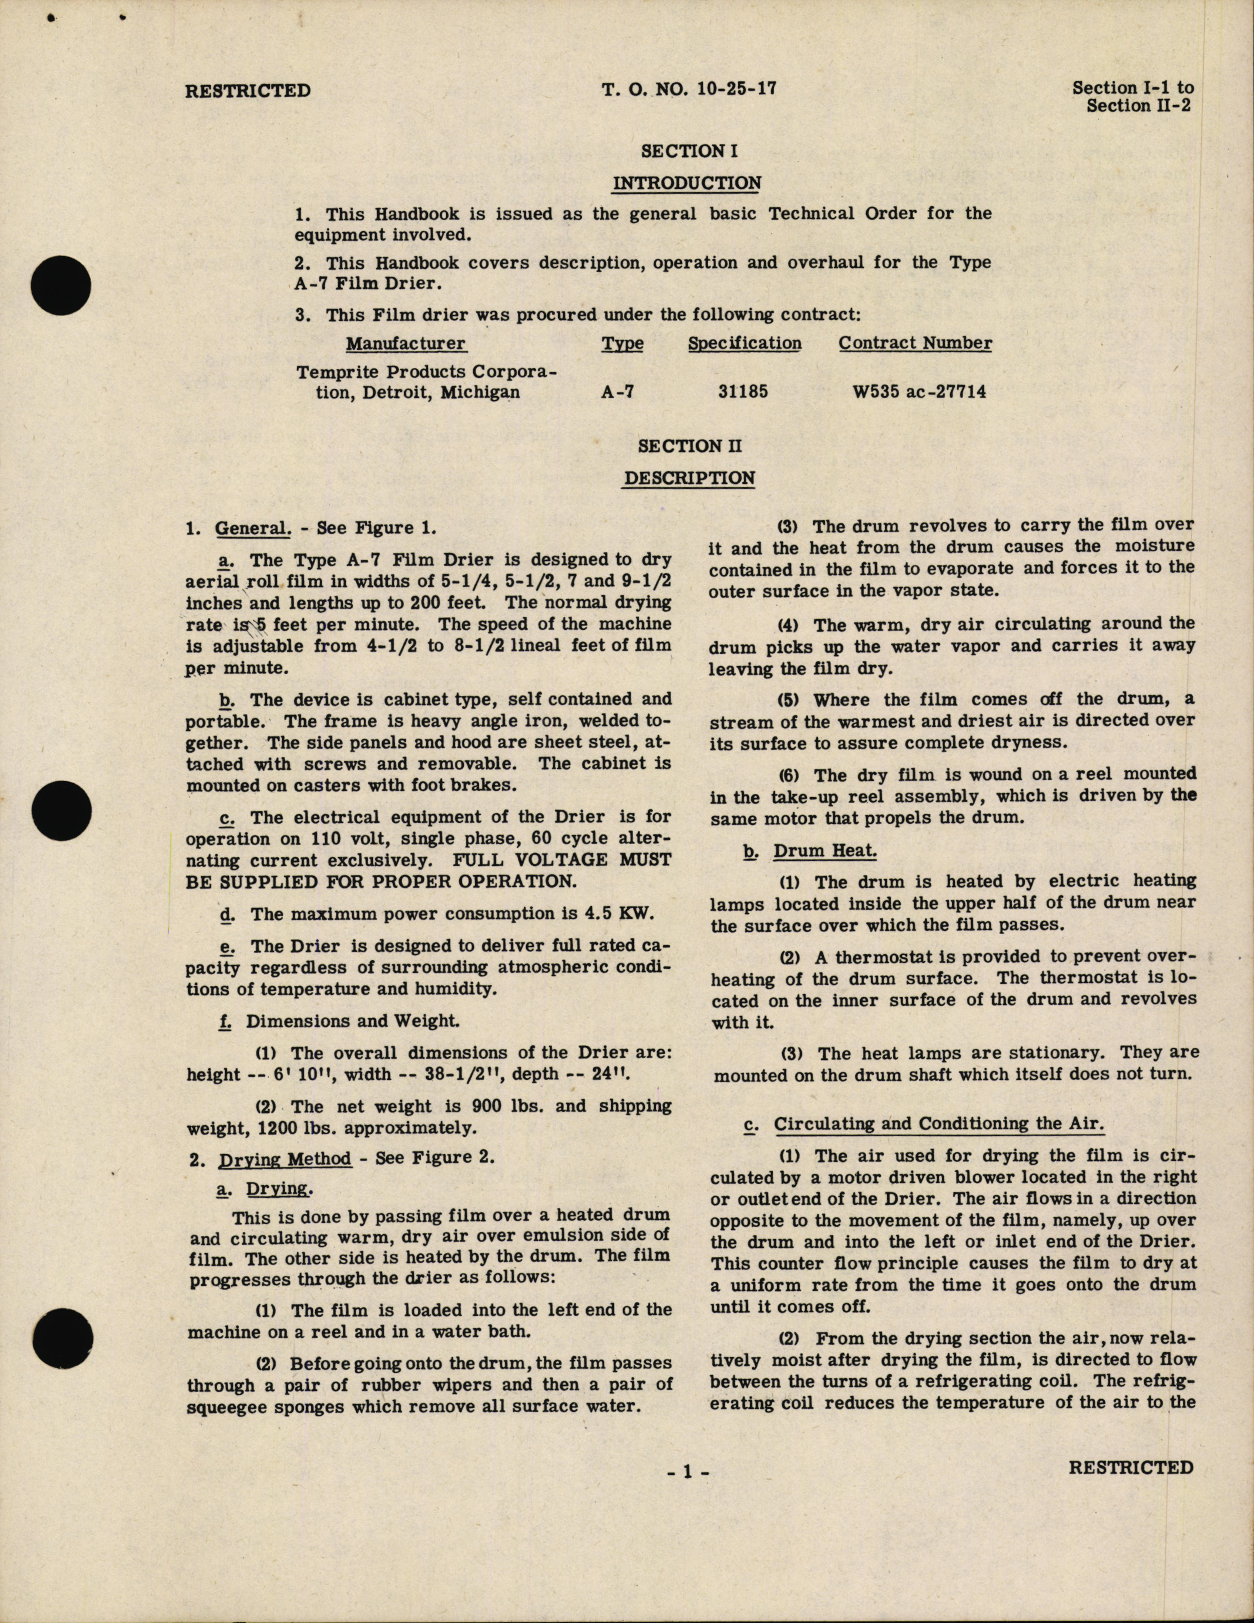 Sample page 7 from AirCorps Library document: Handbook of Instructions with Parts Catalog for Type A-7 Roll Film Dryer